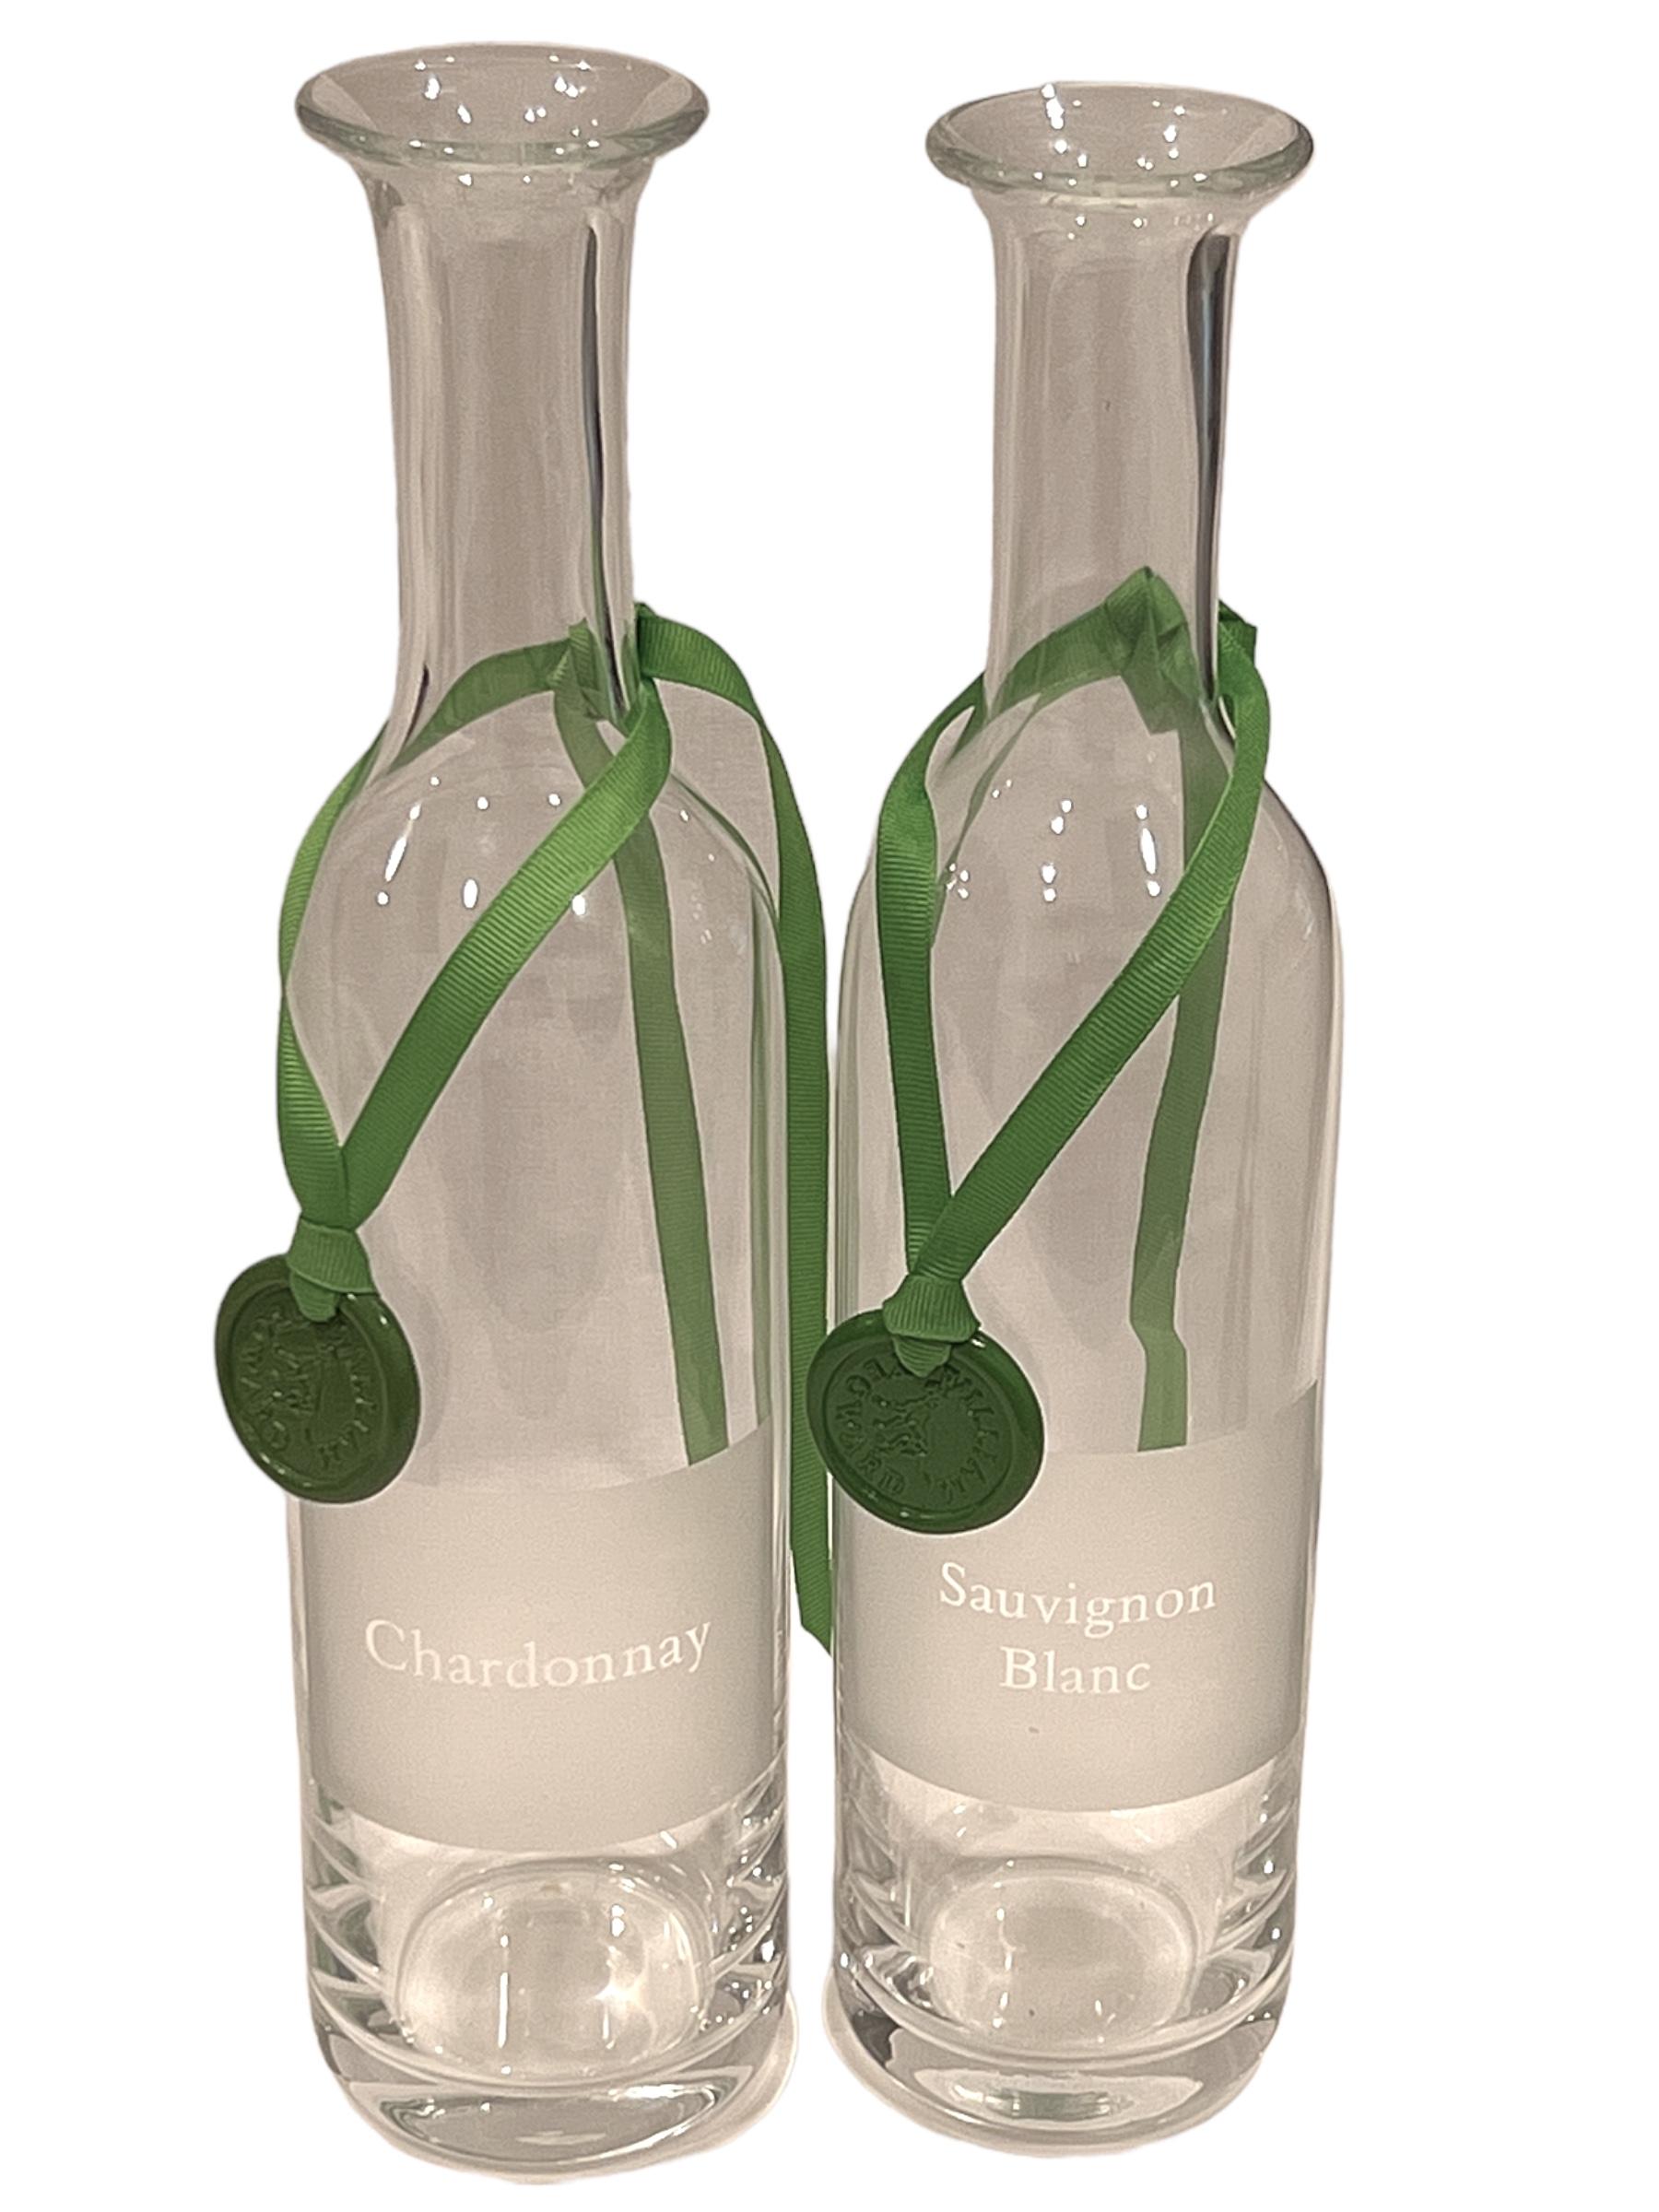 These simple, elegant and classic carafes feature a deeply engraved wine label that reads “Merlot” & “Pinot Noir” on a frosted square; hand made of the finest, lead-free glass, these beautiful carafes are sure to elevate your entertaining to the